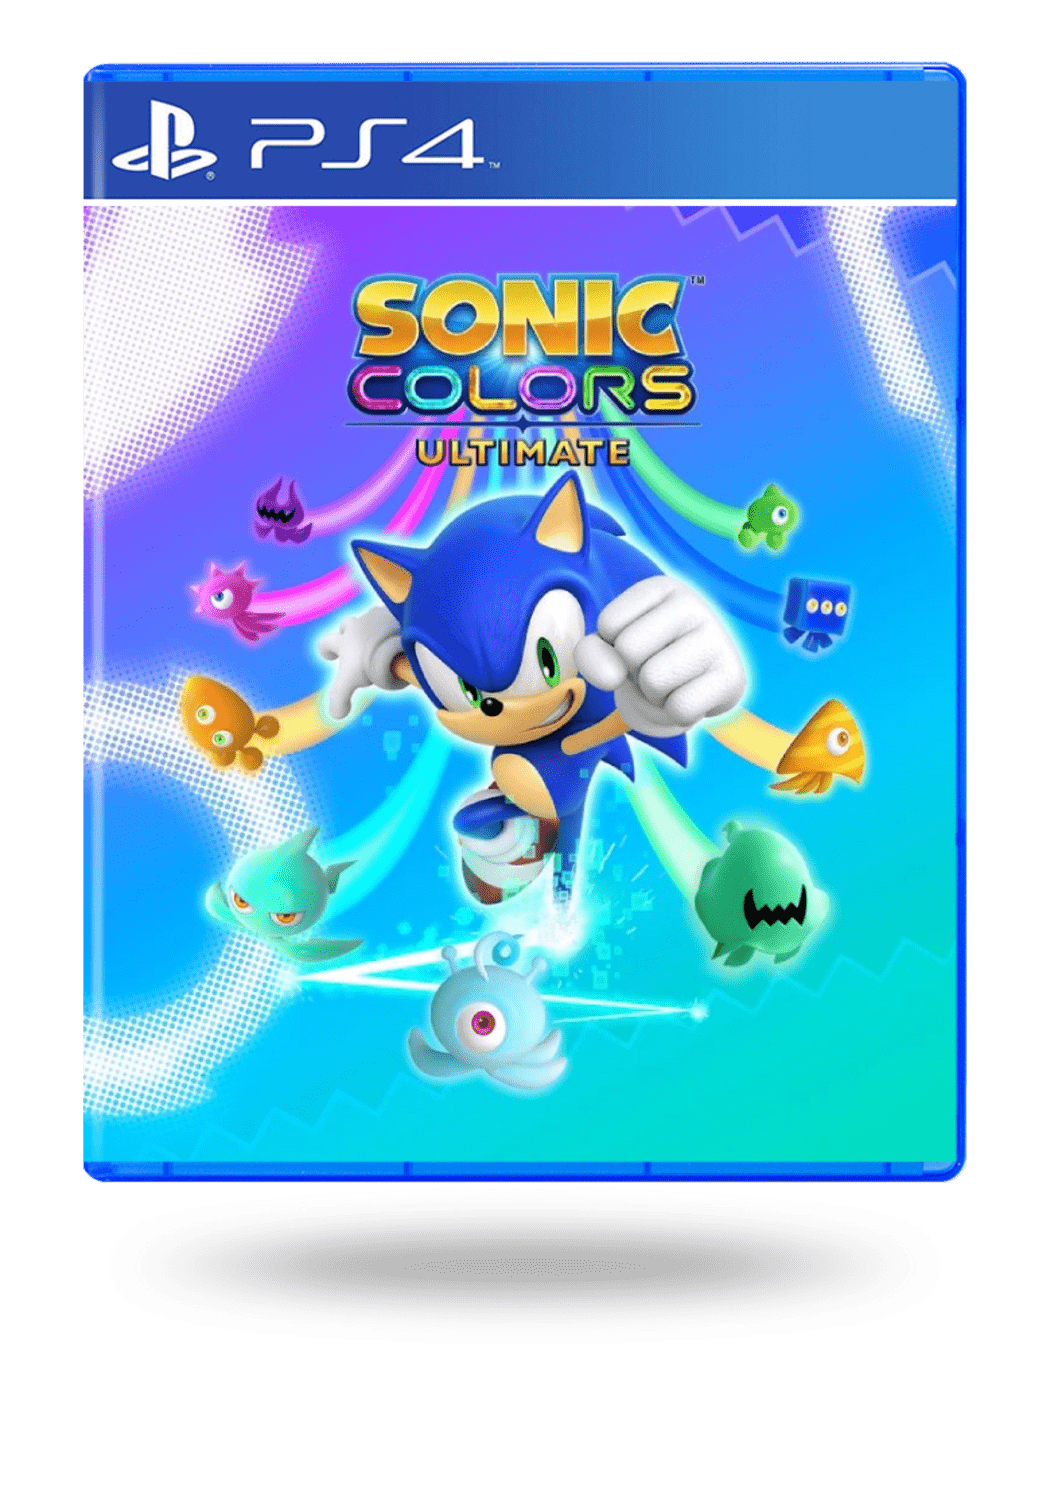 Sonic Colors: Ultimate  Download and Buy Today - Epic Games Store